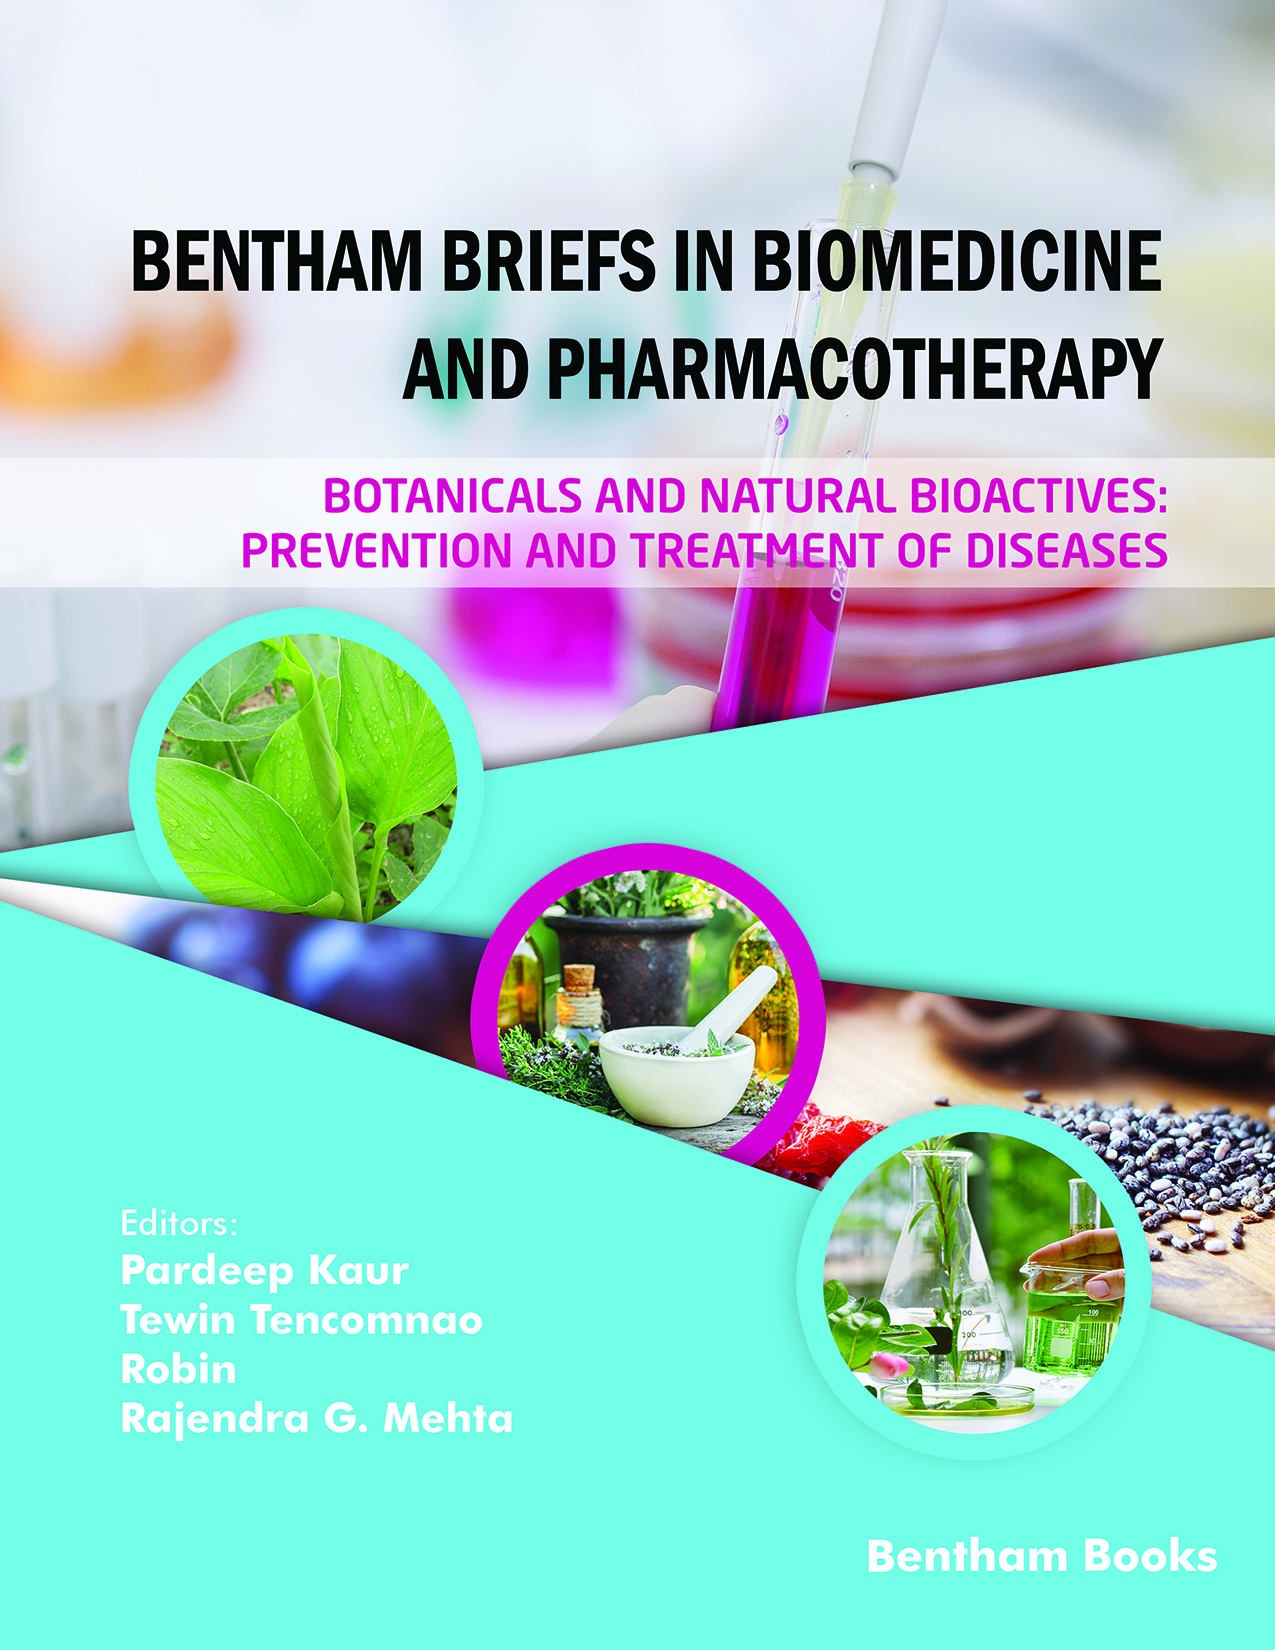 Botanicals and Natural Bioactives: Prevention and Treatment of Diseases